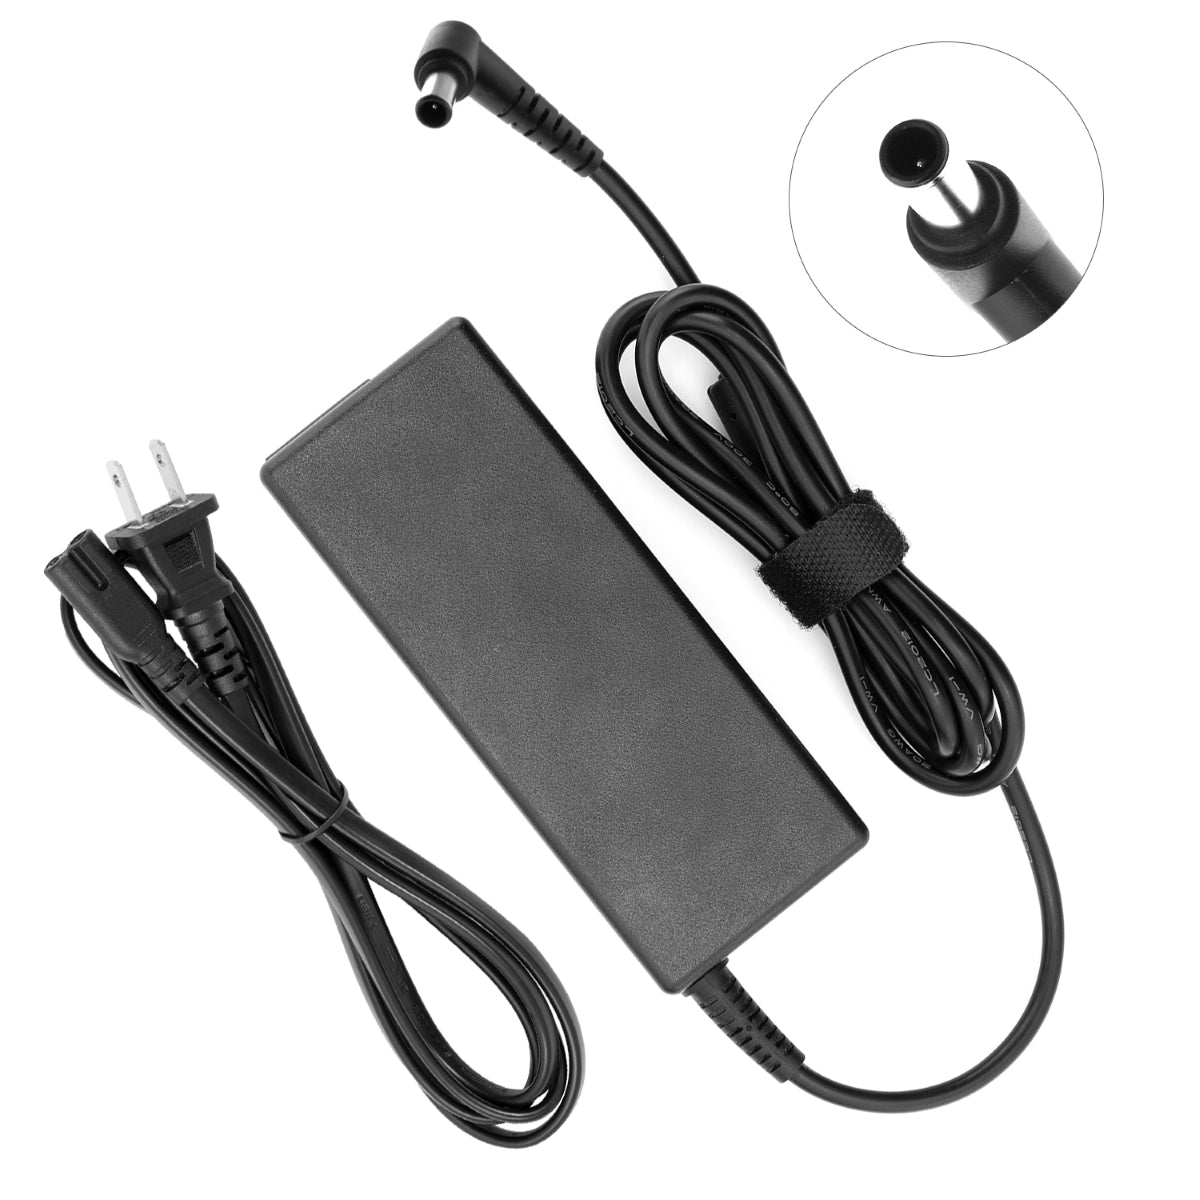 AC Adapter for LG 19EN33T-B Monitor